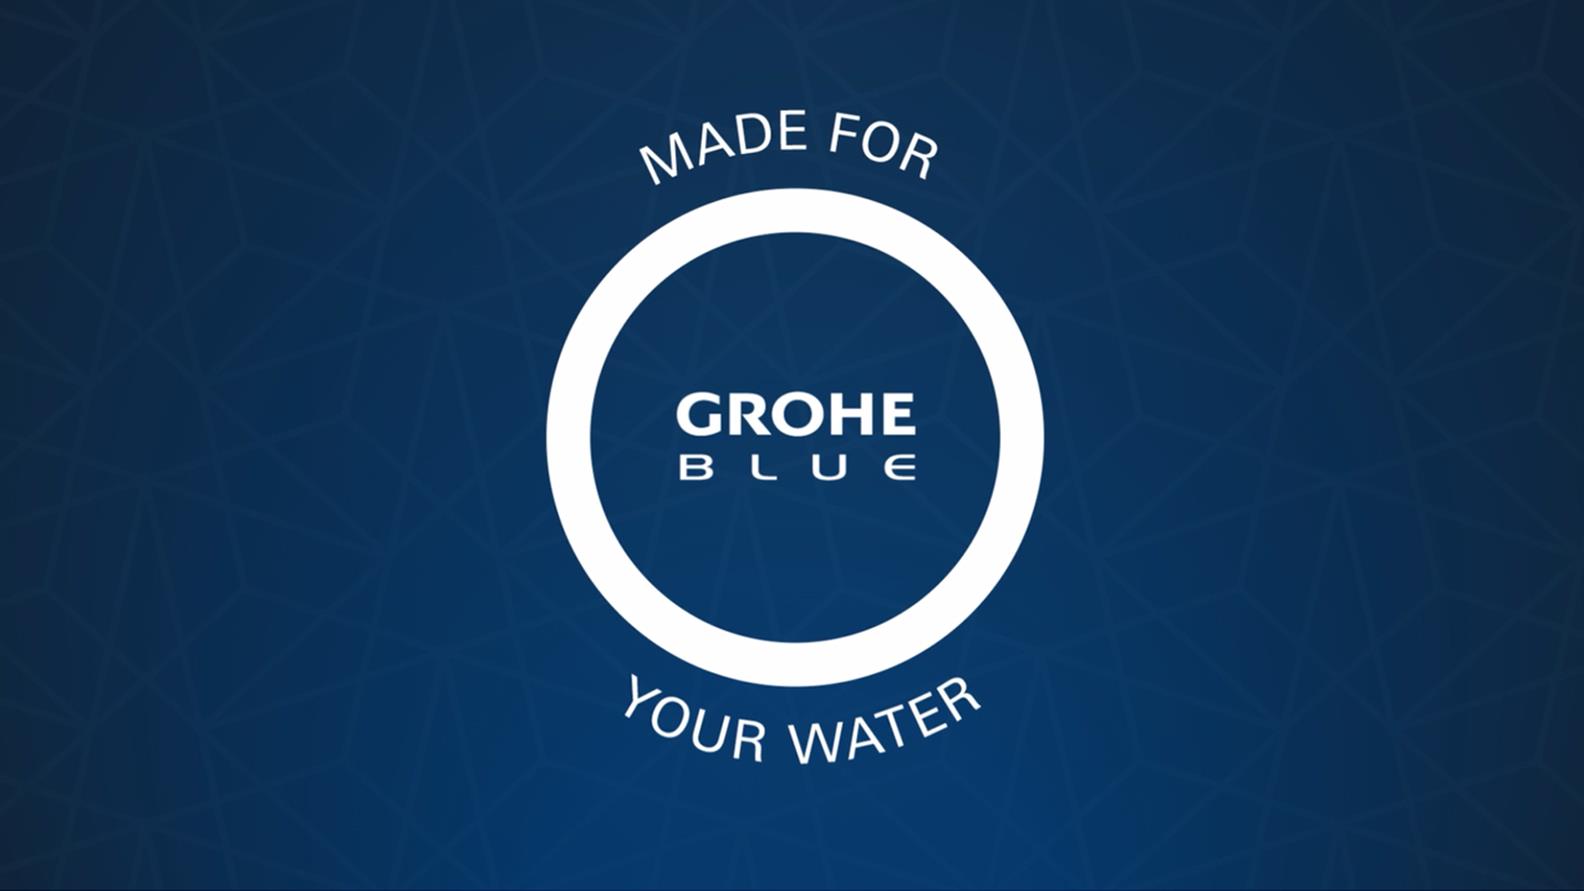 Start your homemade sparkling drinks with GROHE BLUE Fizz 